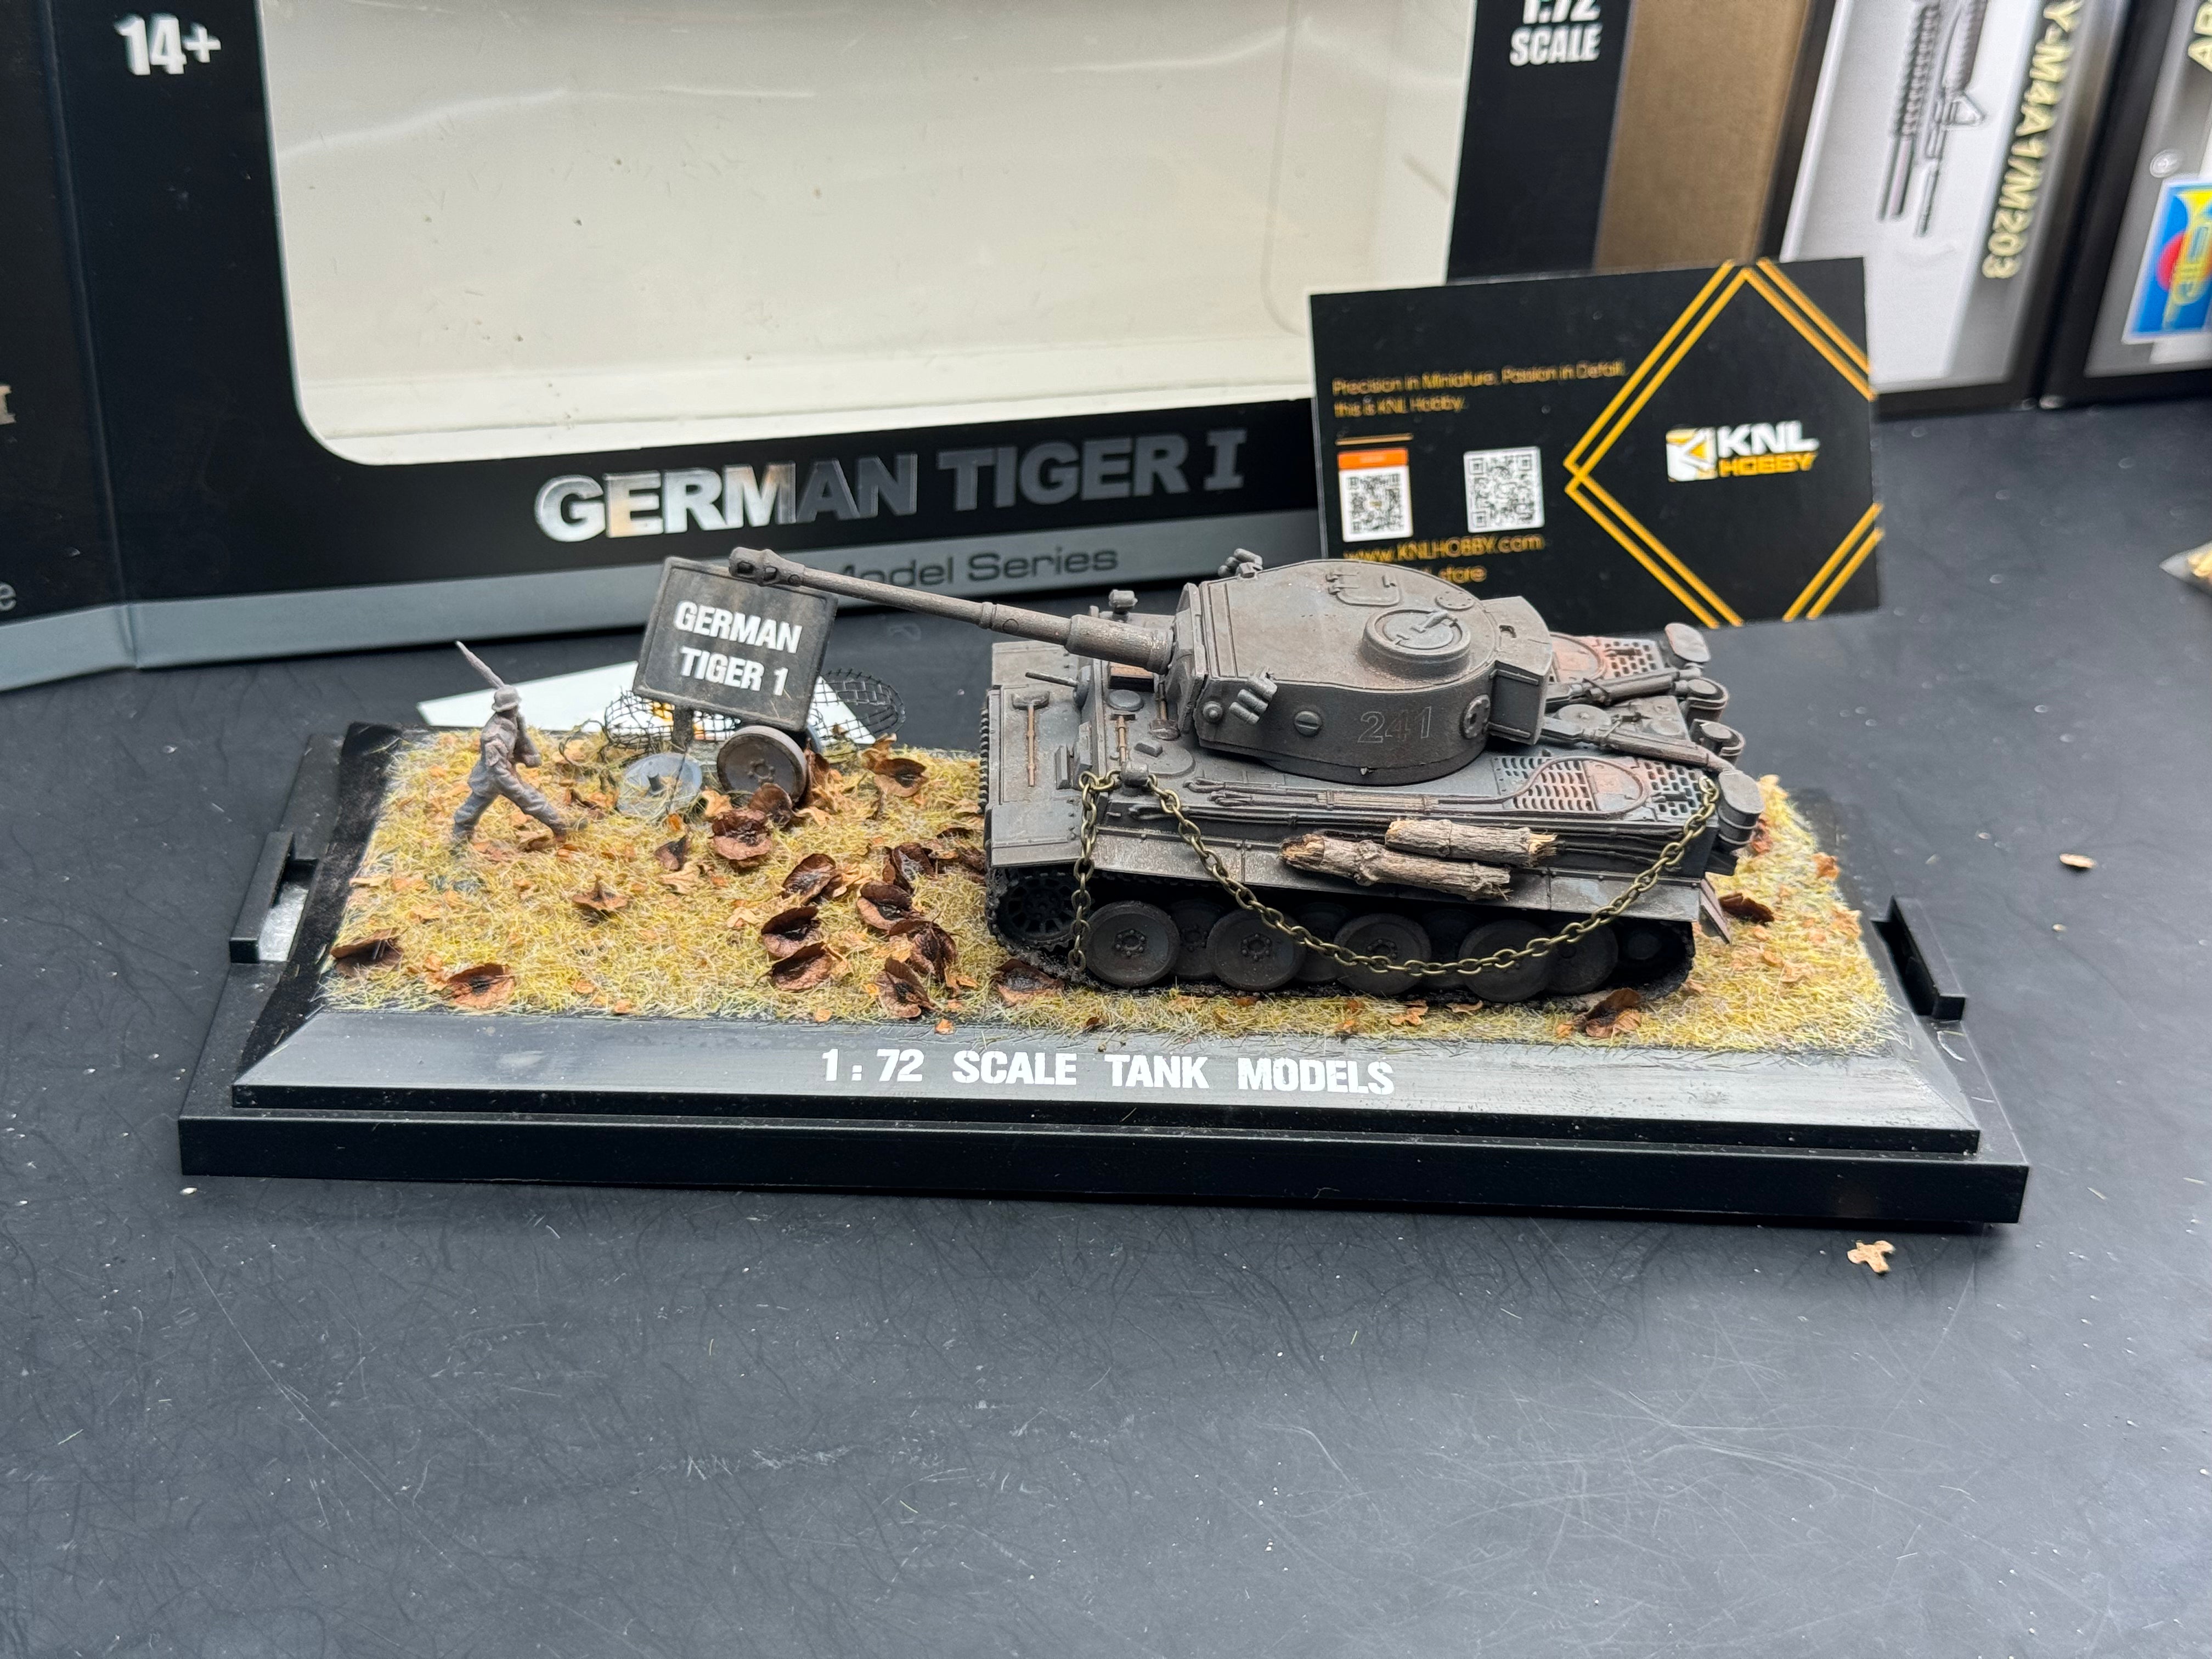 KNL Hobby 1/72 scale alloy tank model static diecast model German Tiger I tank model hand-made old painting aging painting hand-